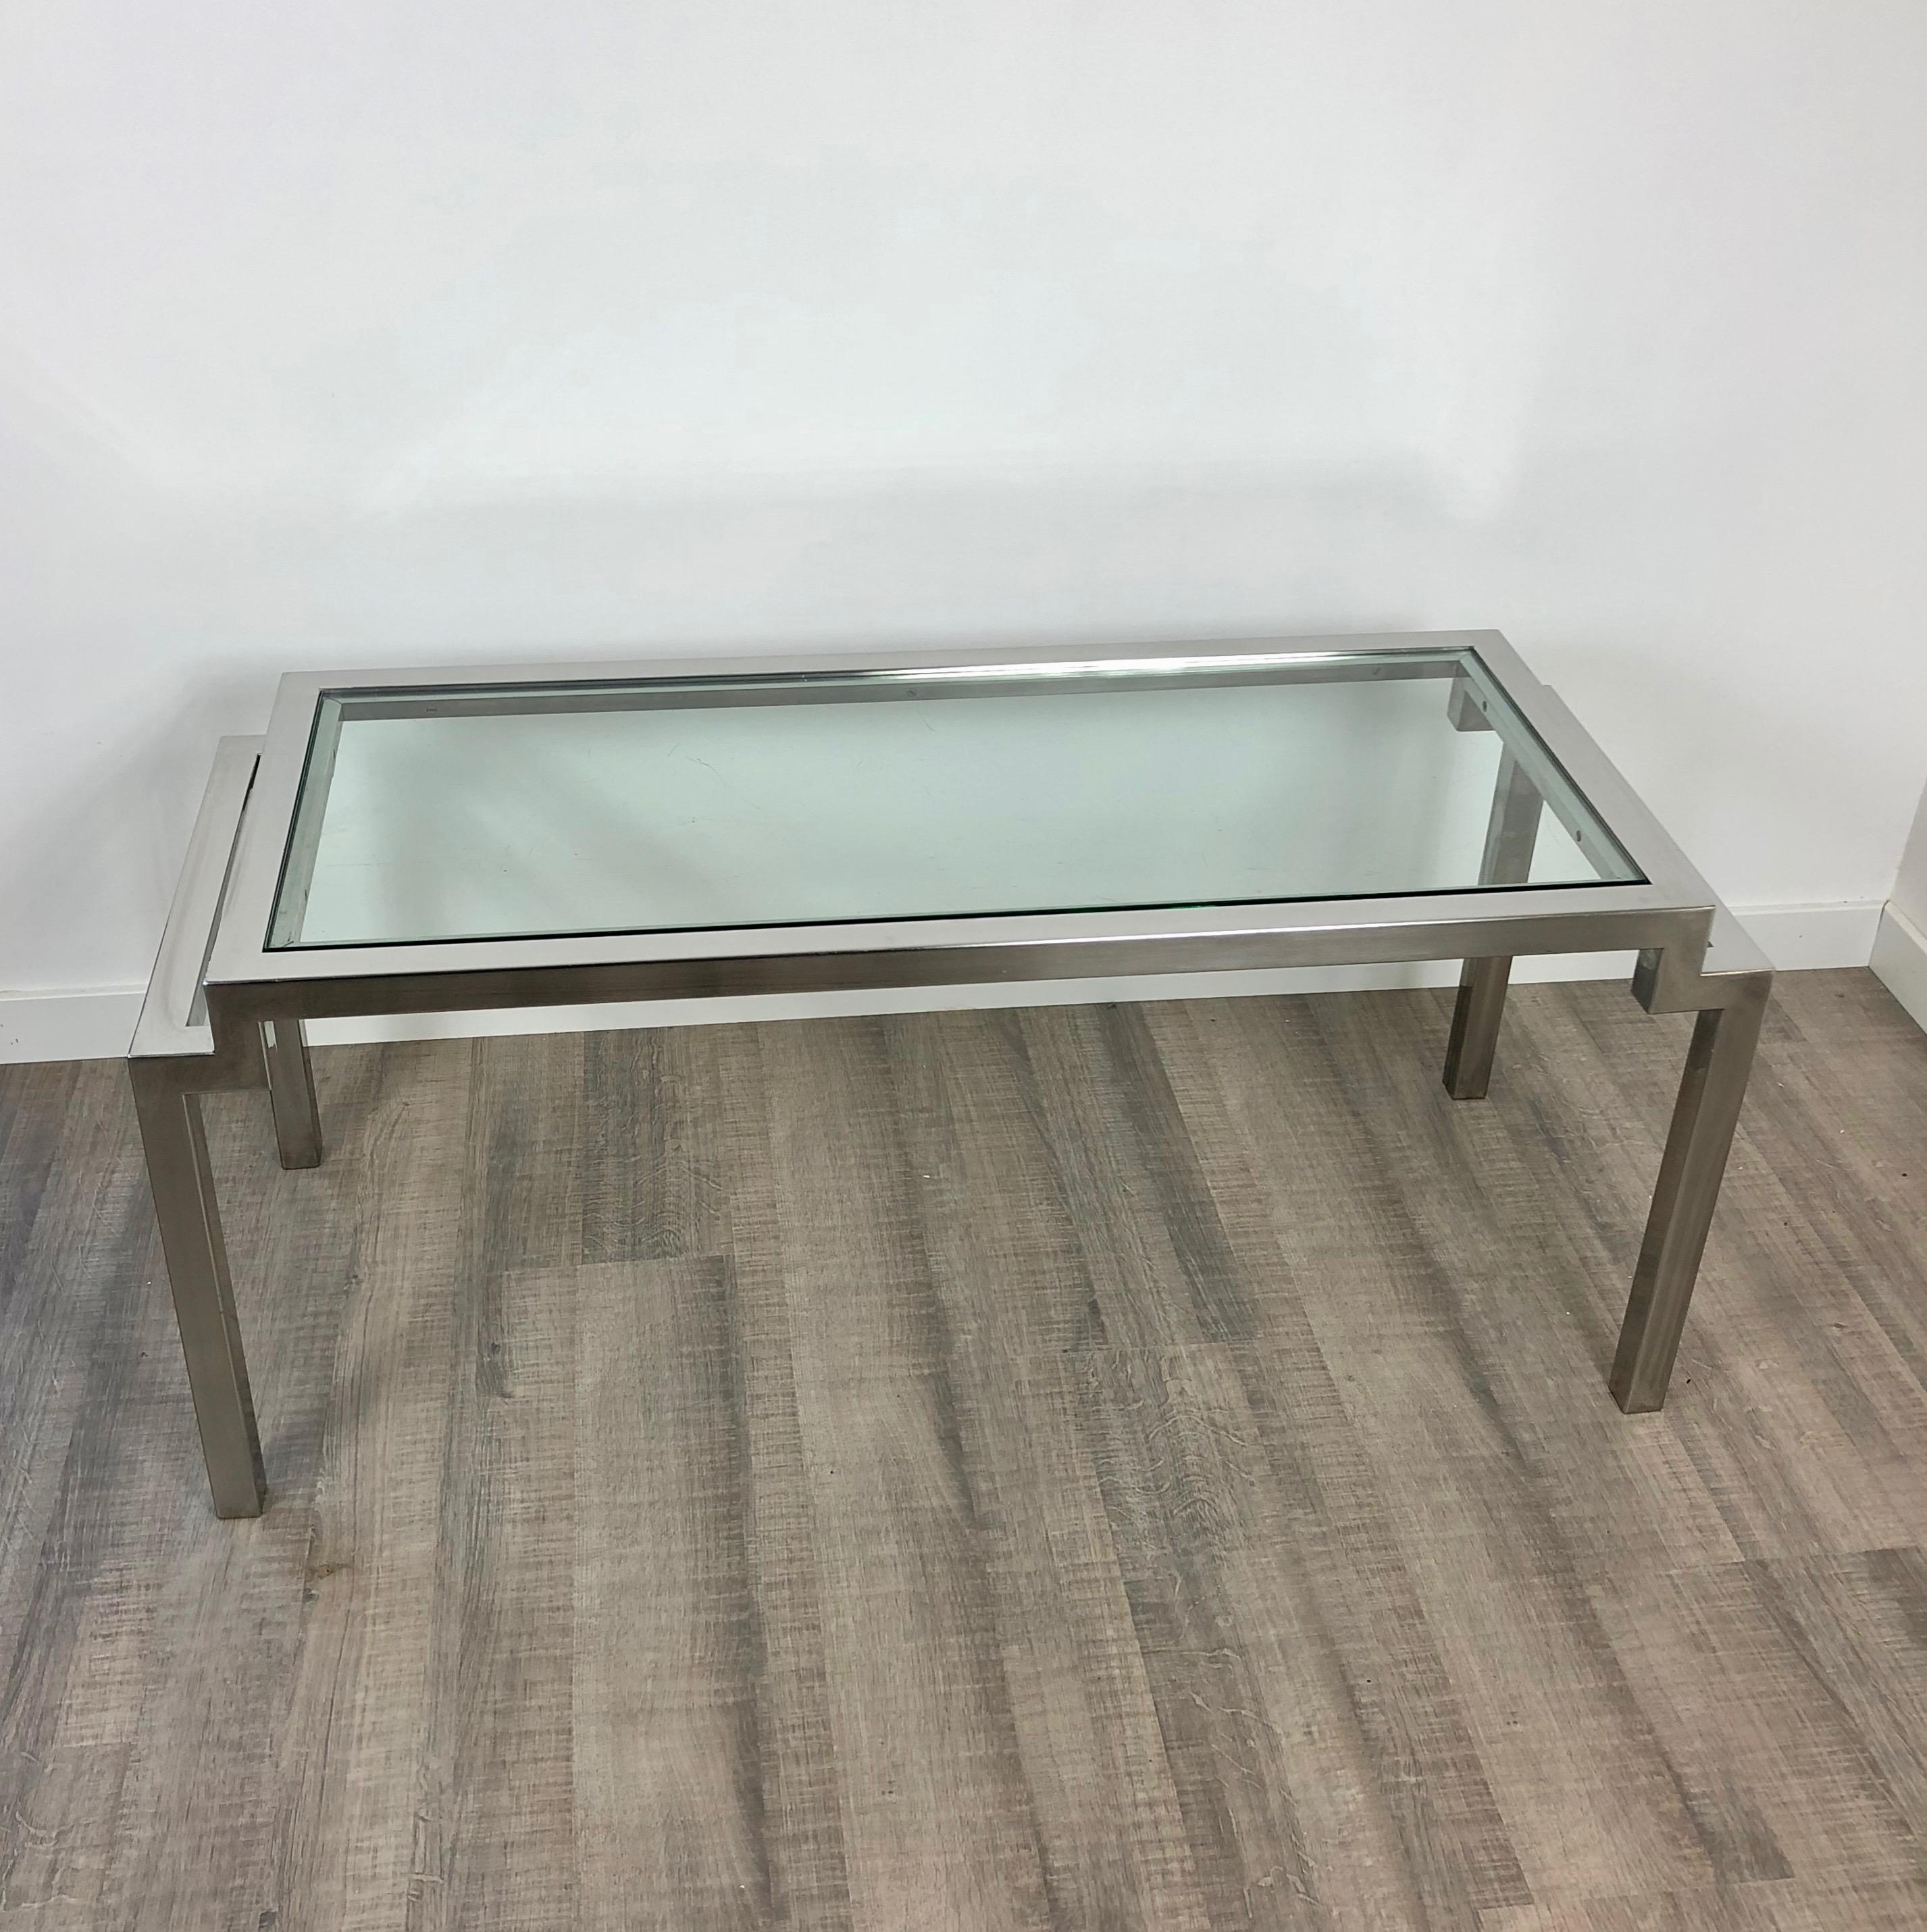 Mid-Century Modern Coffee Table in Chrome and Glass 1970s Modern, Italy For Sale